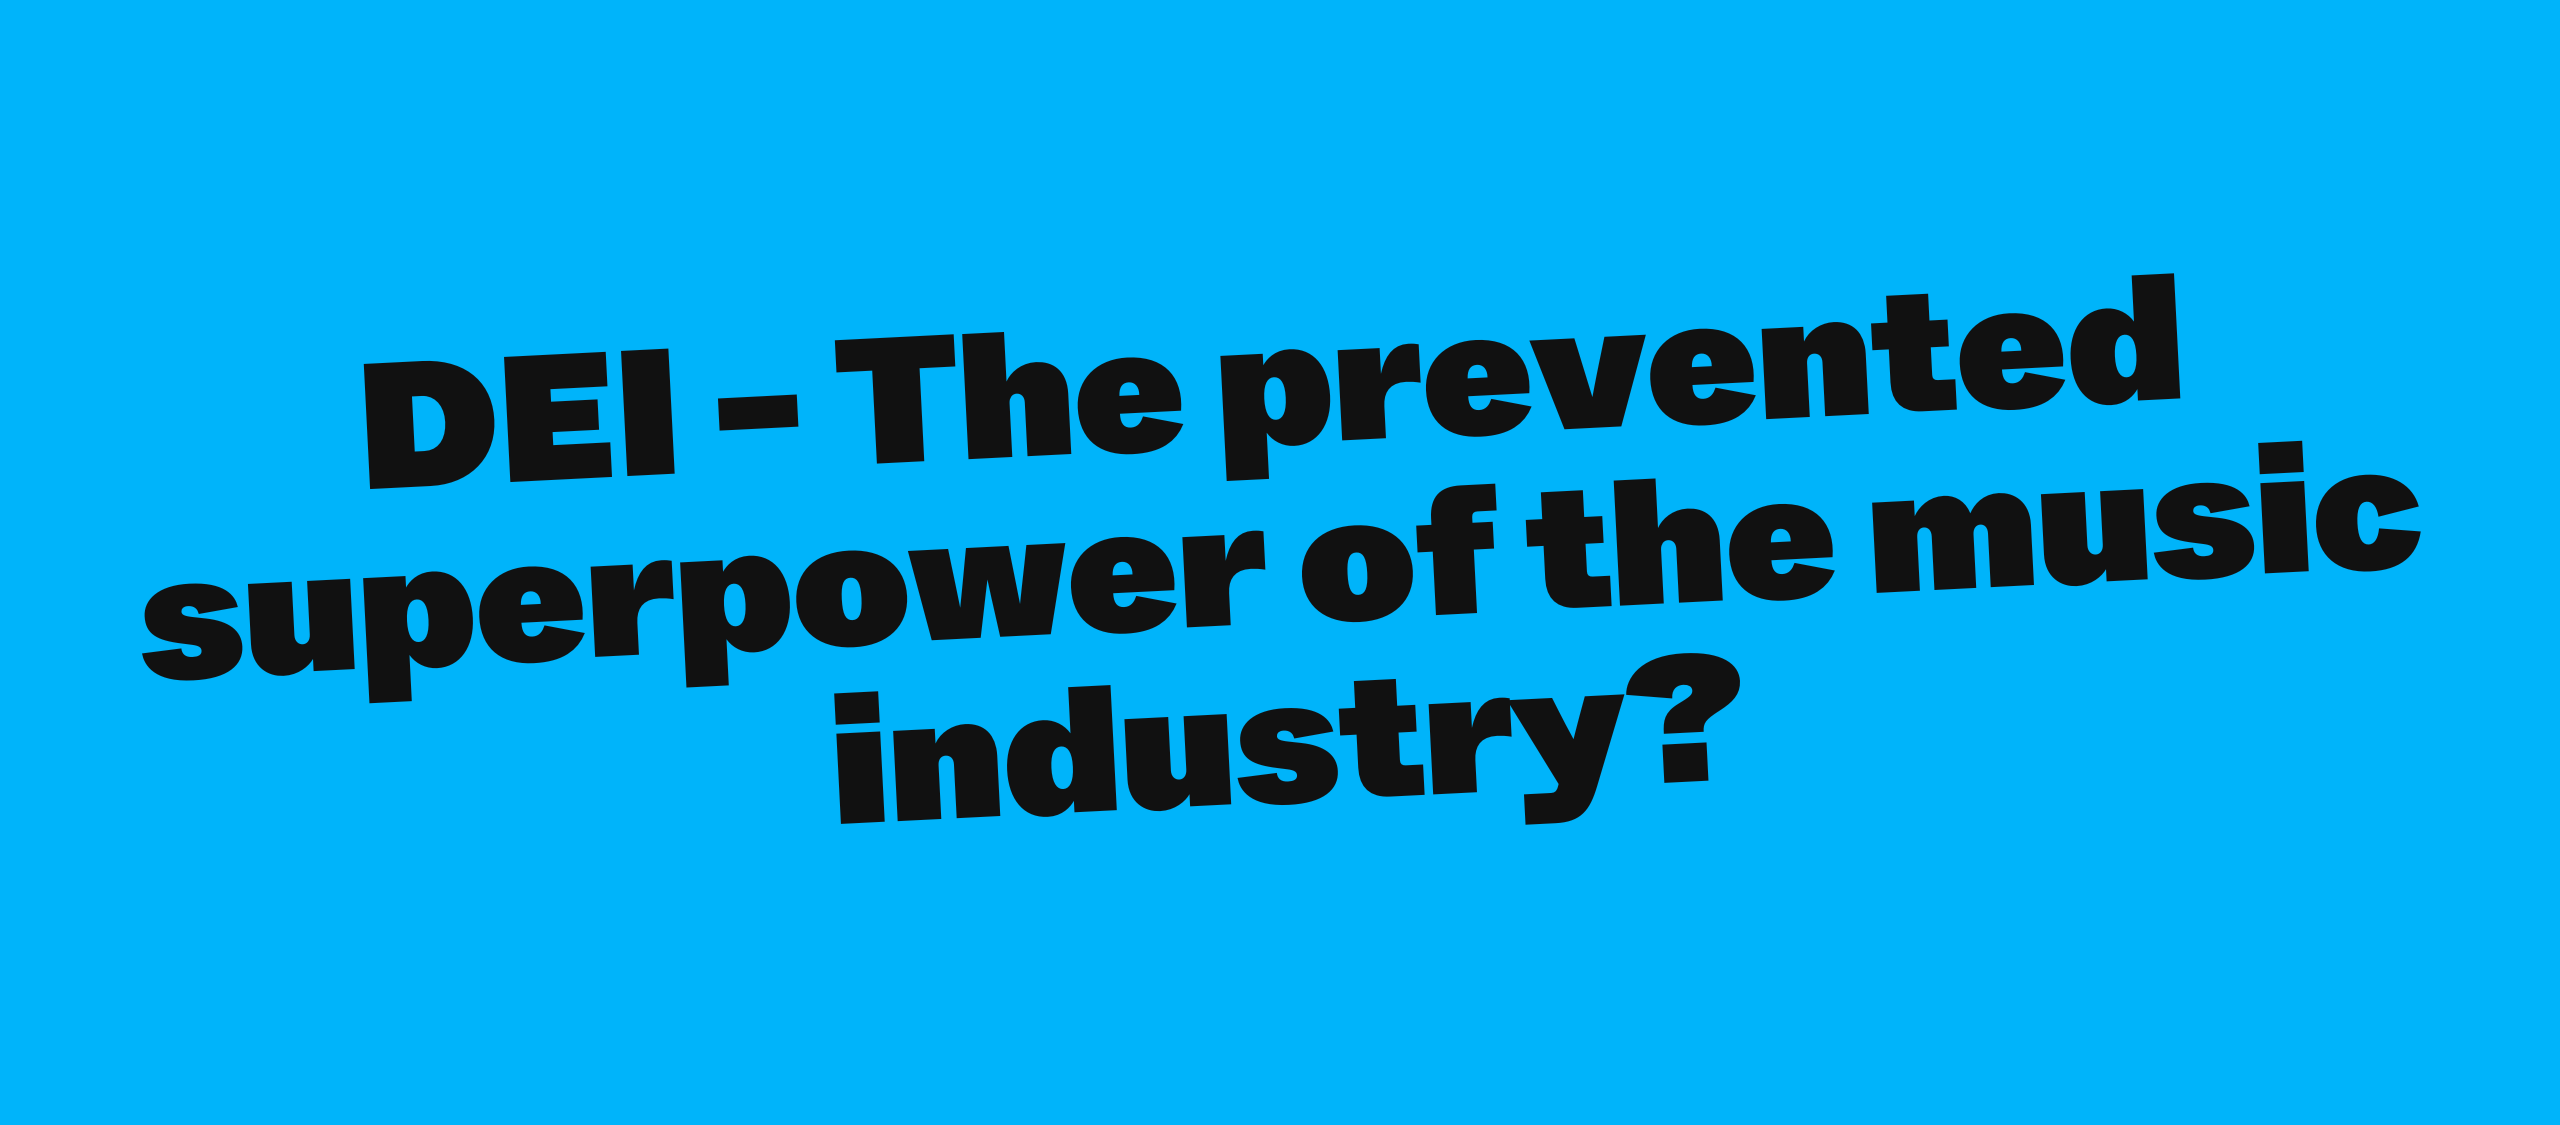 DEI - The prevented superpower of the music industry?